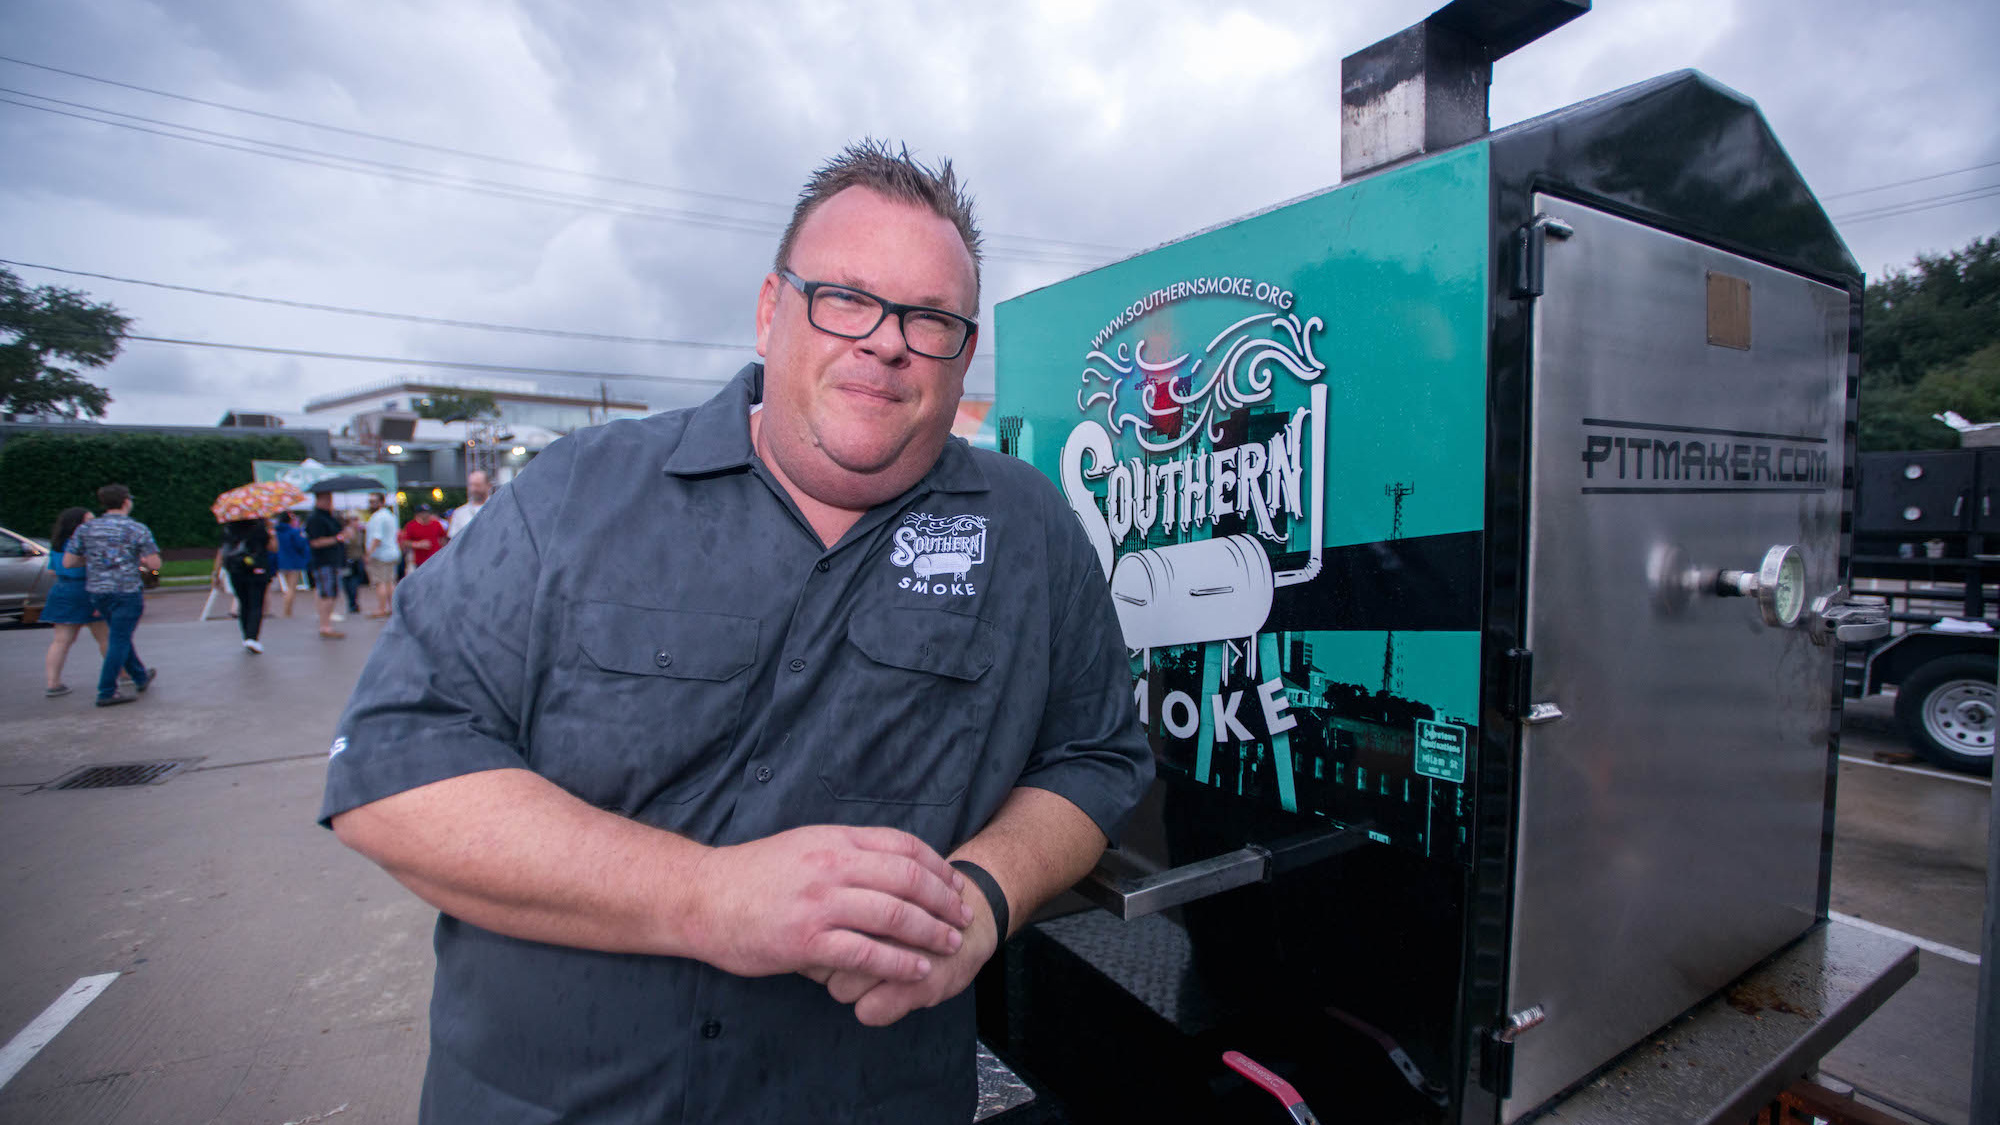 People say, we’re coming out of COVID. But we’re not coming out of problems. Our industry is always in turmoil, in some aspect." Chris Shepard with the Southern Smoke smoker. // Photo by Catchlight Photography Southern Smoke 2018 raises over $425,000 for charity at its 3rd annual event in Houston, Texas on September 30, 2018